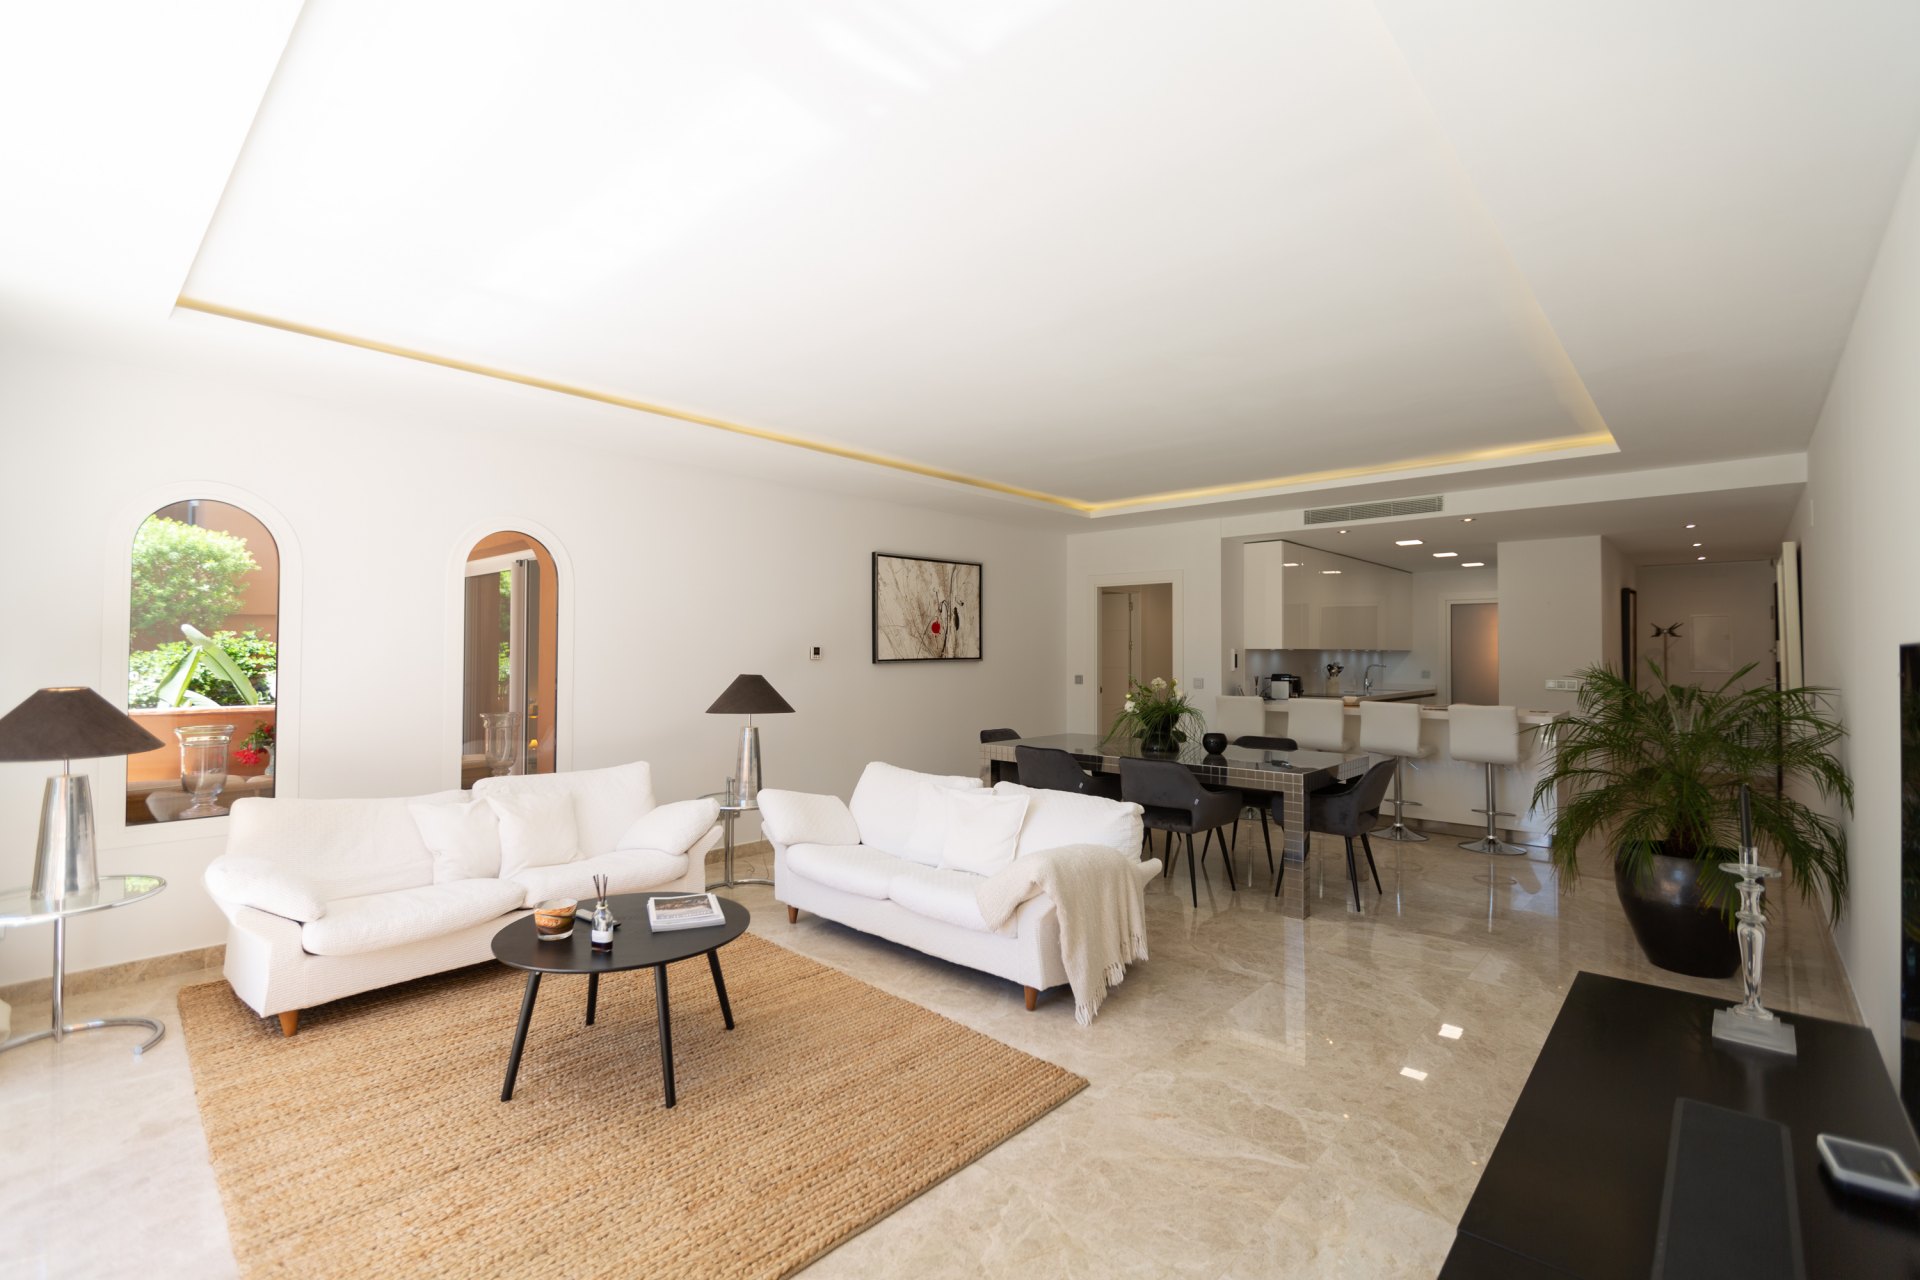 Luxurious and spacious 3-bedroom apartment on the intermediate floor in the heart of the Golf Valley - La Cerquilla - Nueva Andalucía - Marbella